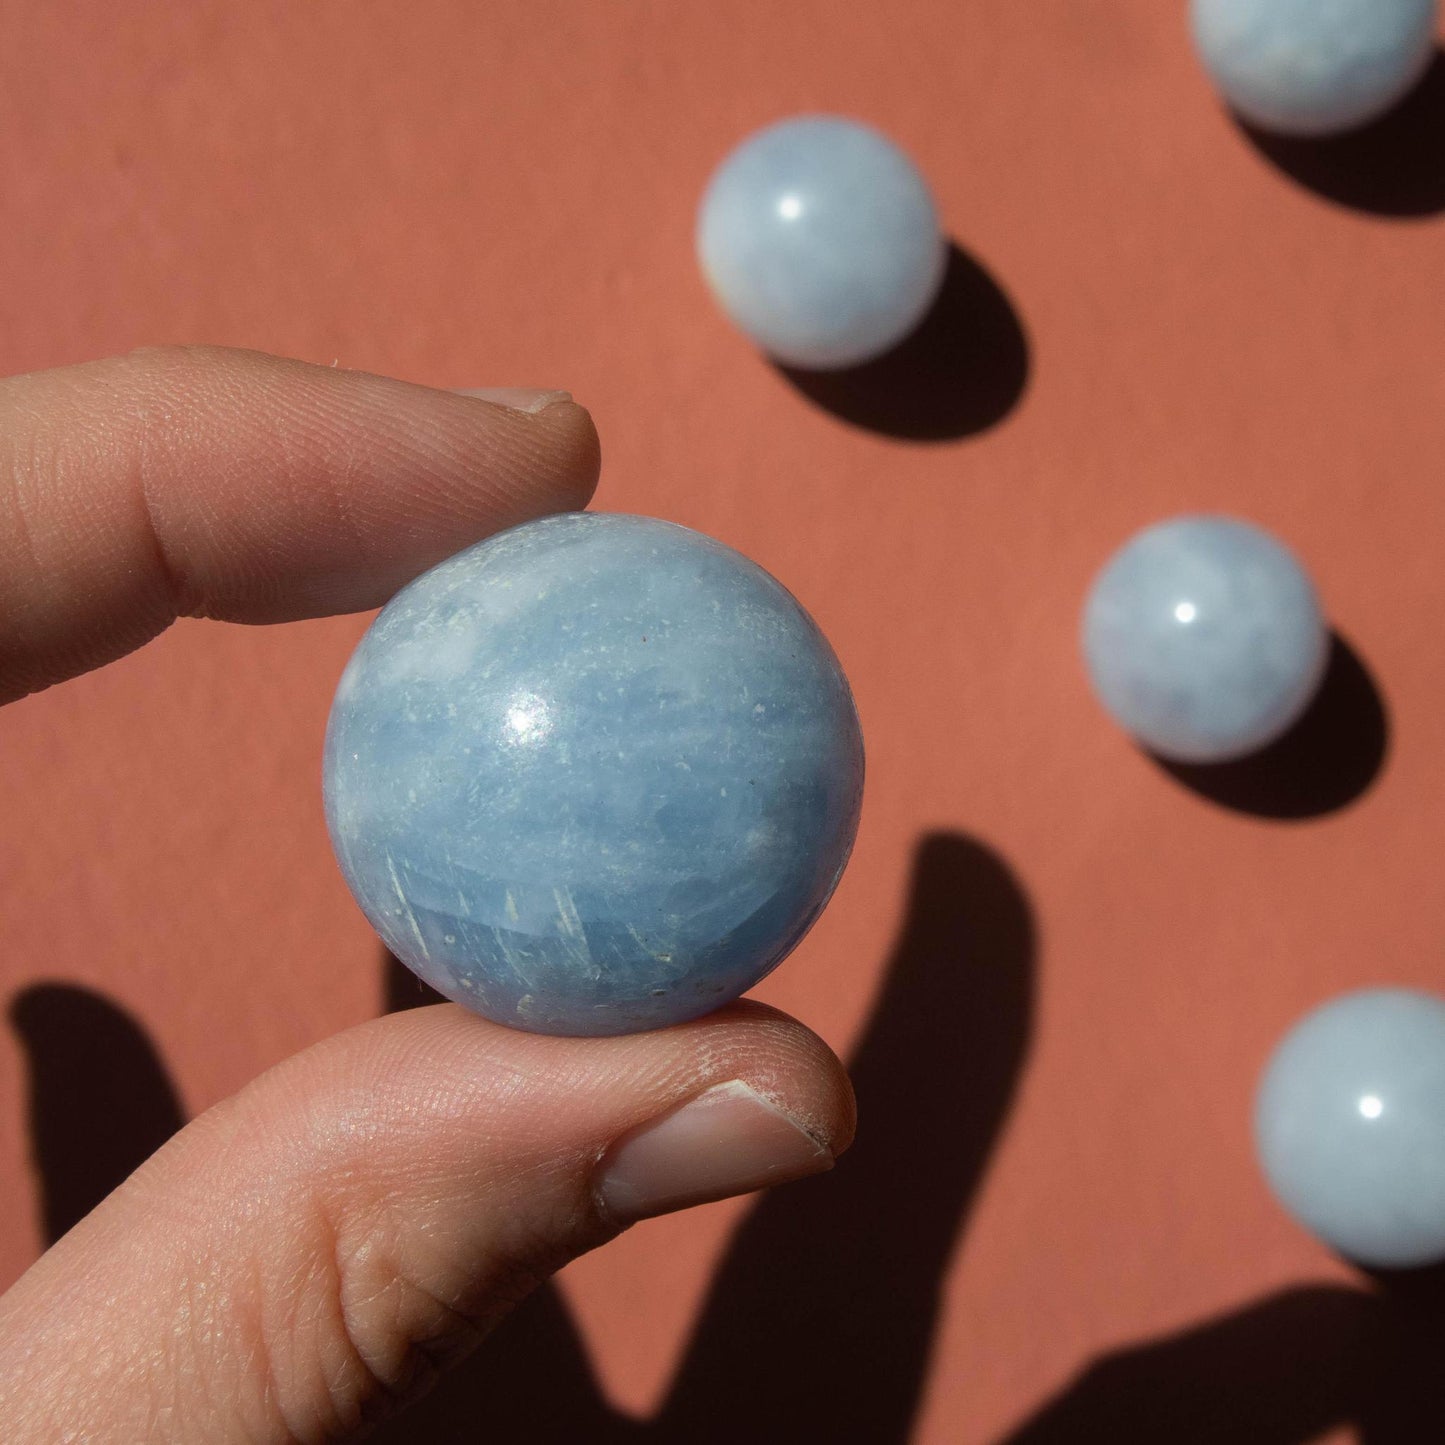 blue calcite, blue calcite sphere, crystal sphere, blue calcite crystal, blue calcite stone, blue calcite properties, blue calcite healing properties, blue calcite metaphysical properties, blue calcite meaning